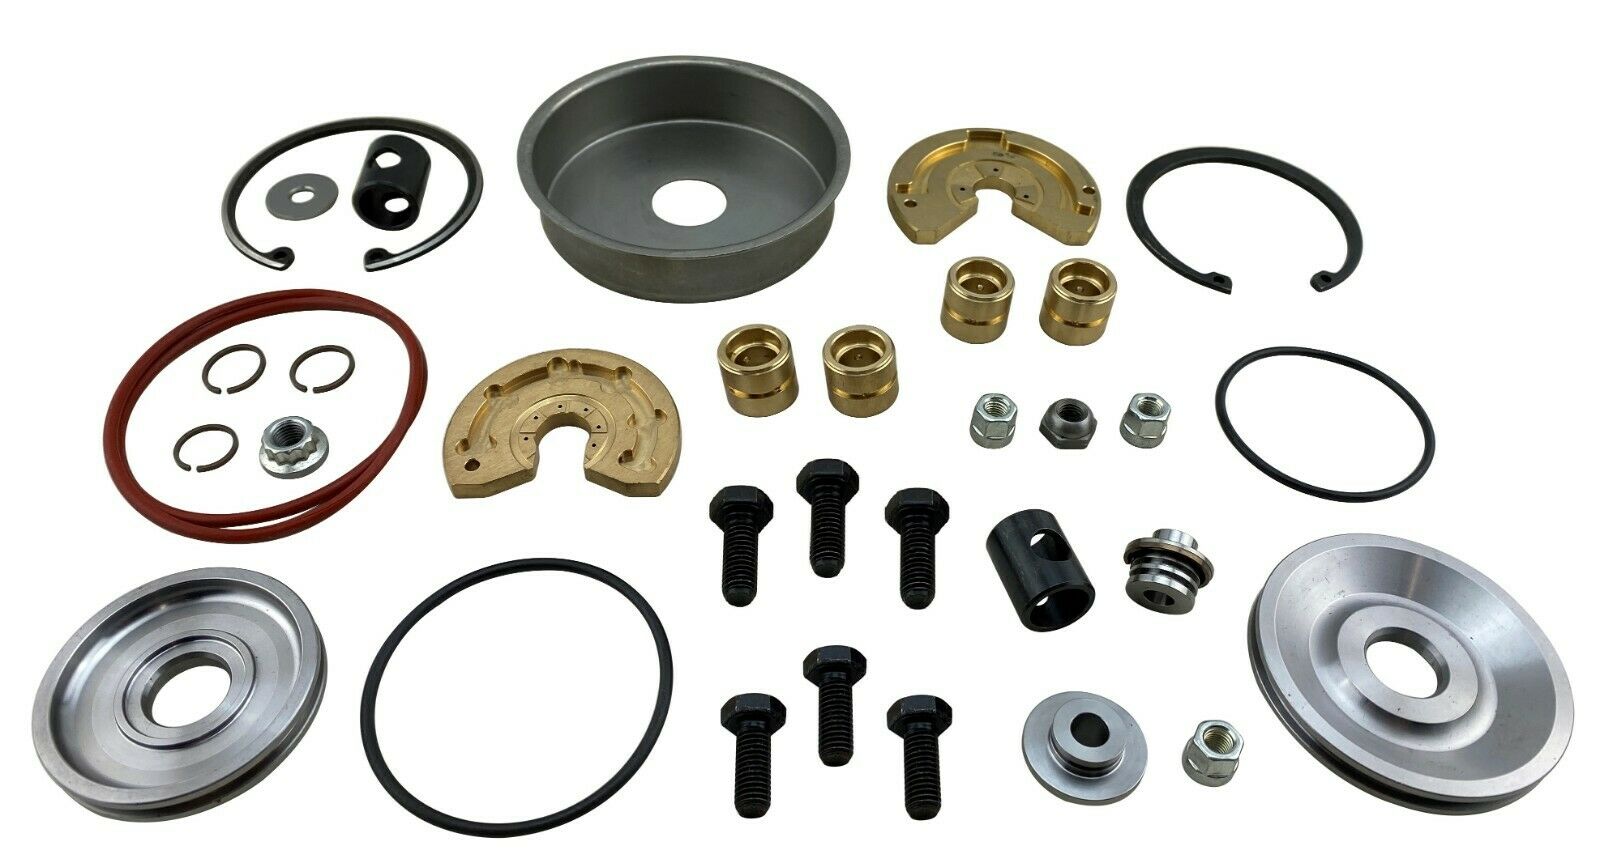 V2S Compound Turbo High  Low Pressure Rebuild Kit for 6.4L Powerstrok  NPBoosted